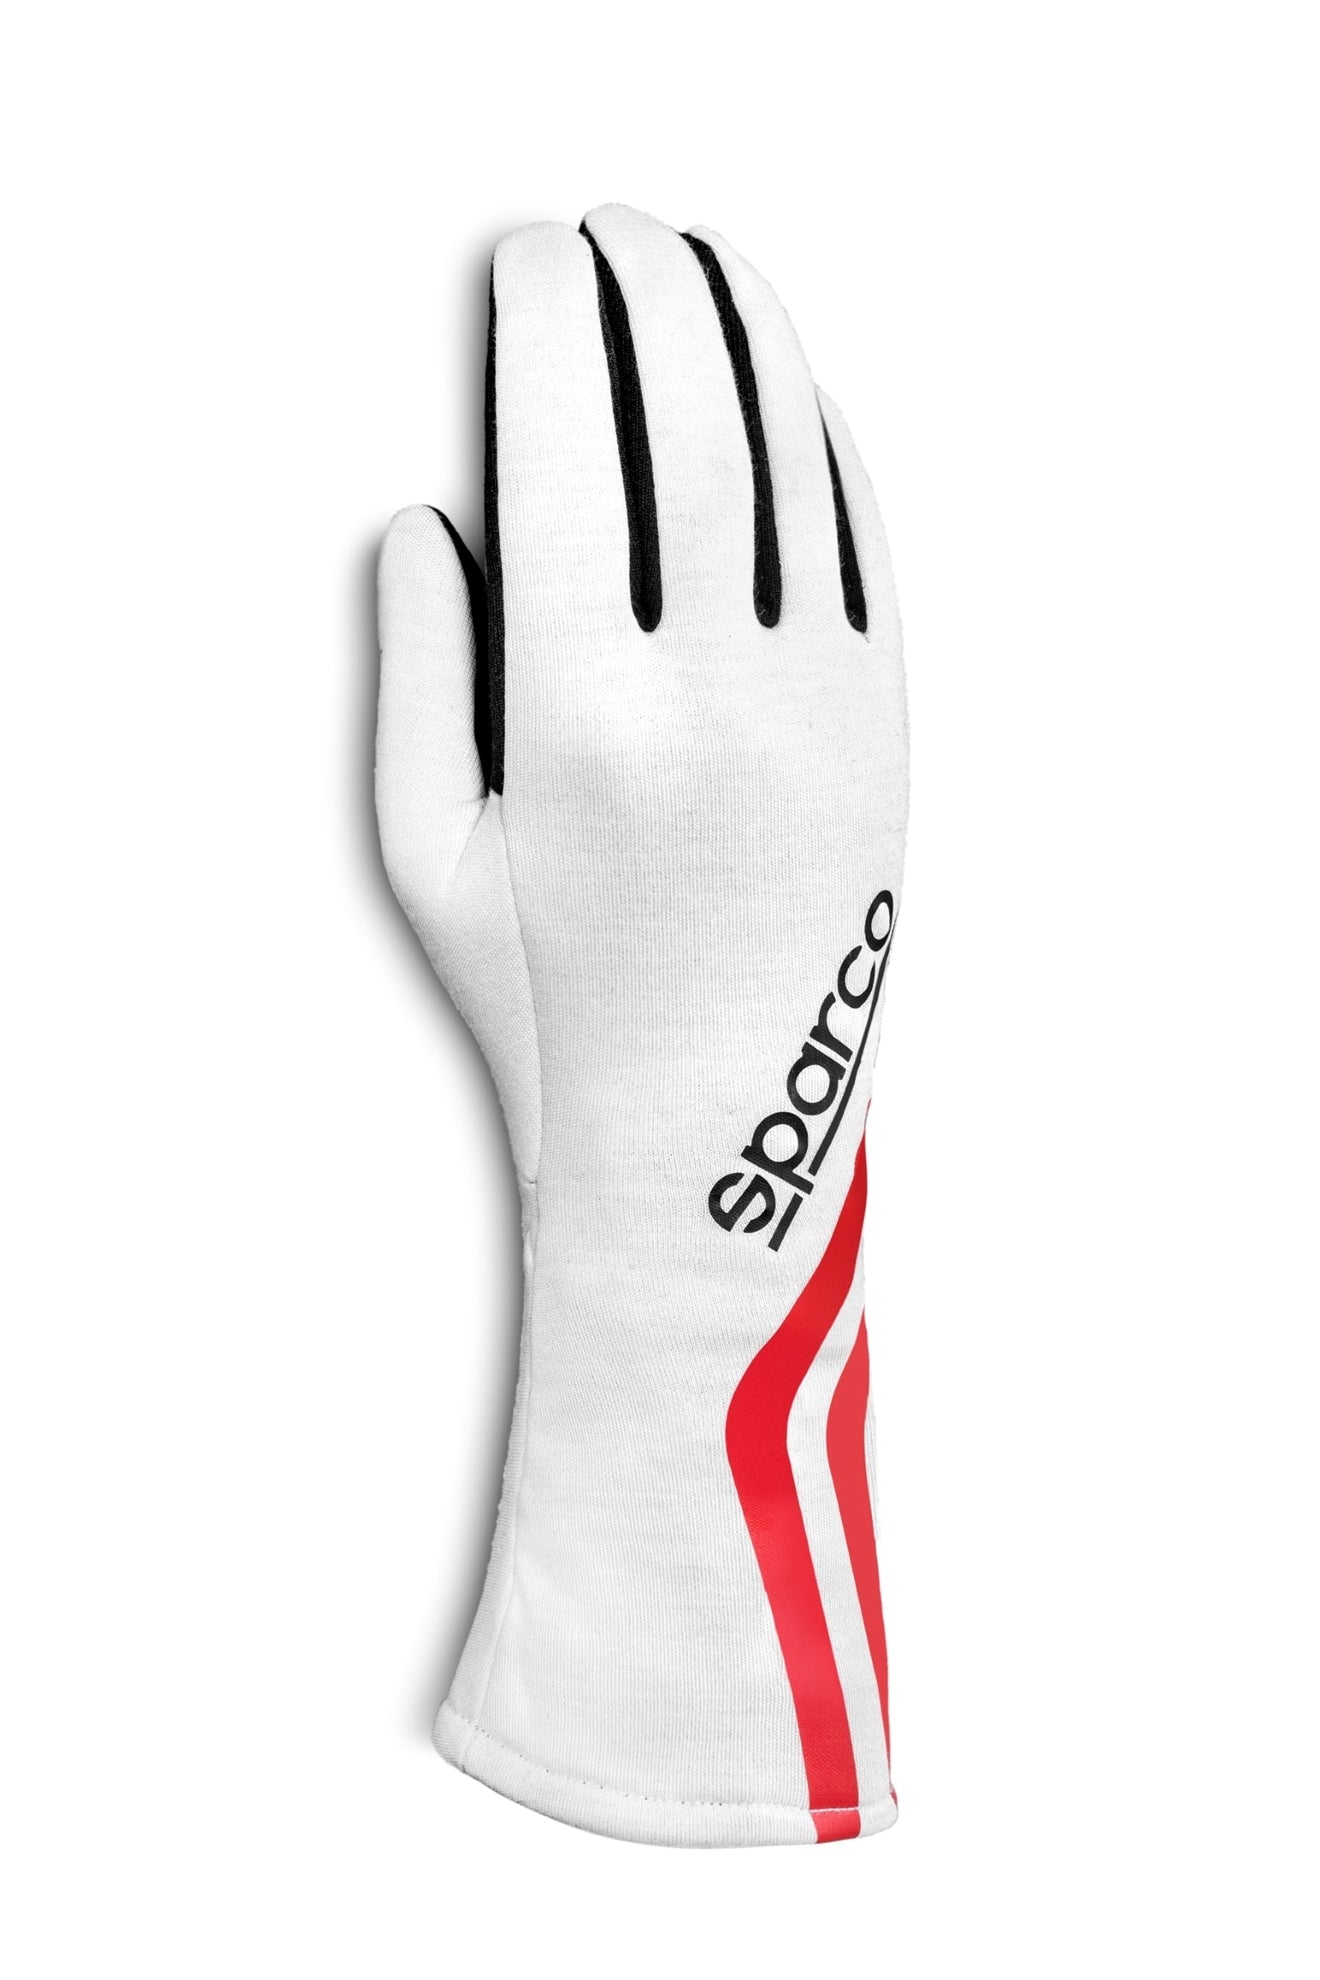 Sparco Land Classic FIA Approved Historic Car Race/Racing/Driving Gloves 